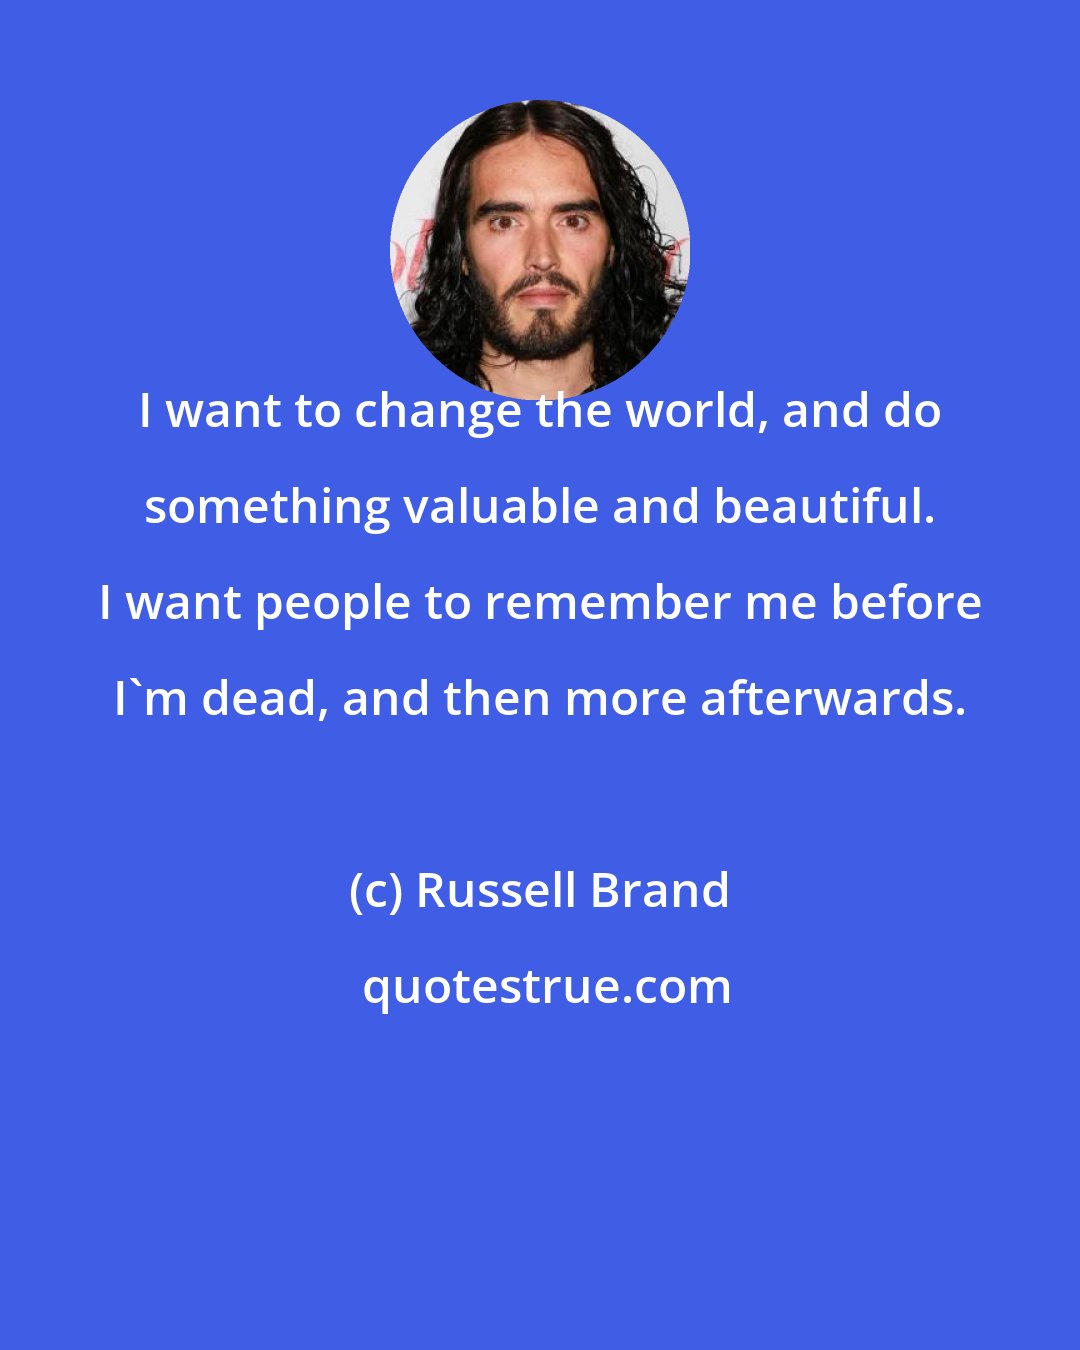 Russell Brand: I want to change the world, and do something valuable and beautiful. I want people to remember me before I'm dead, and then more afterwards.